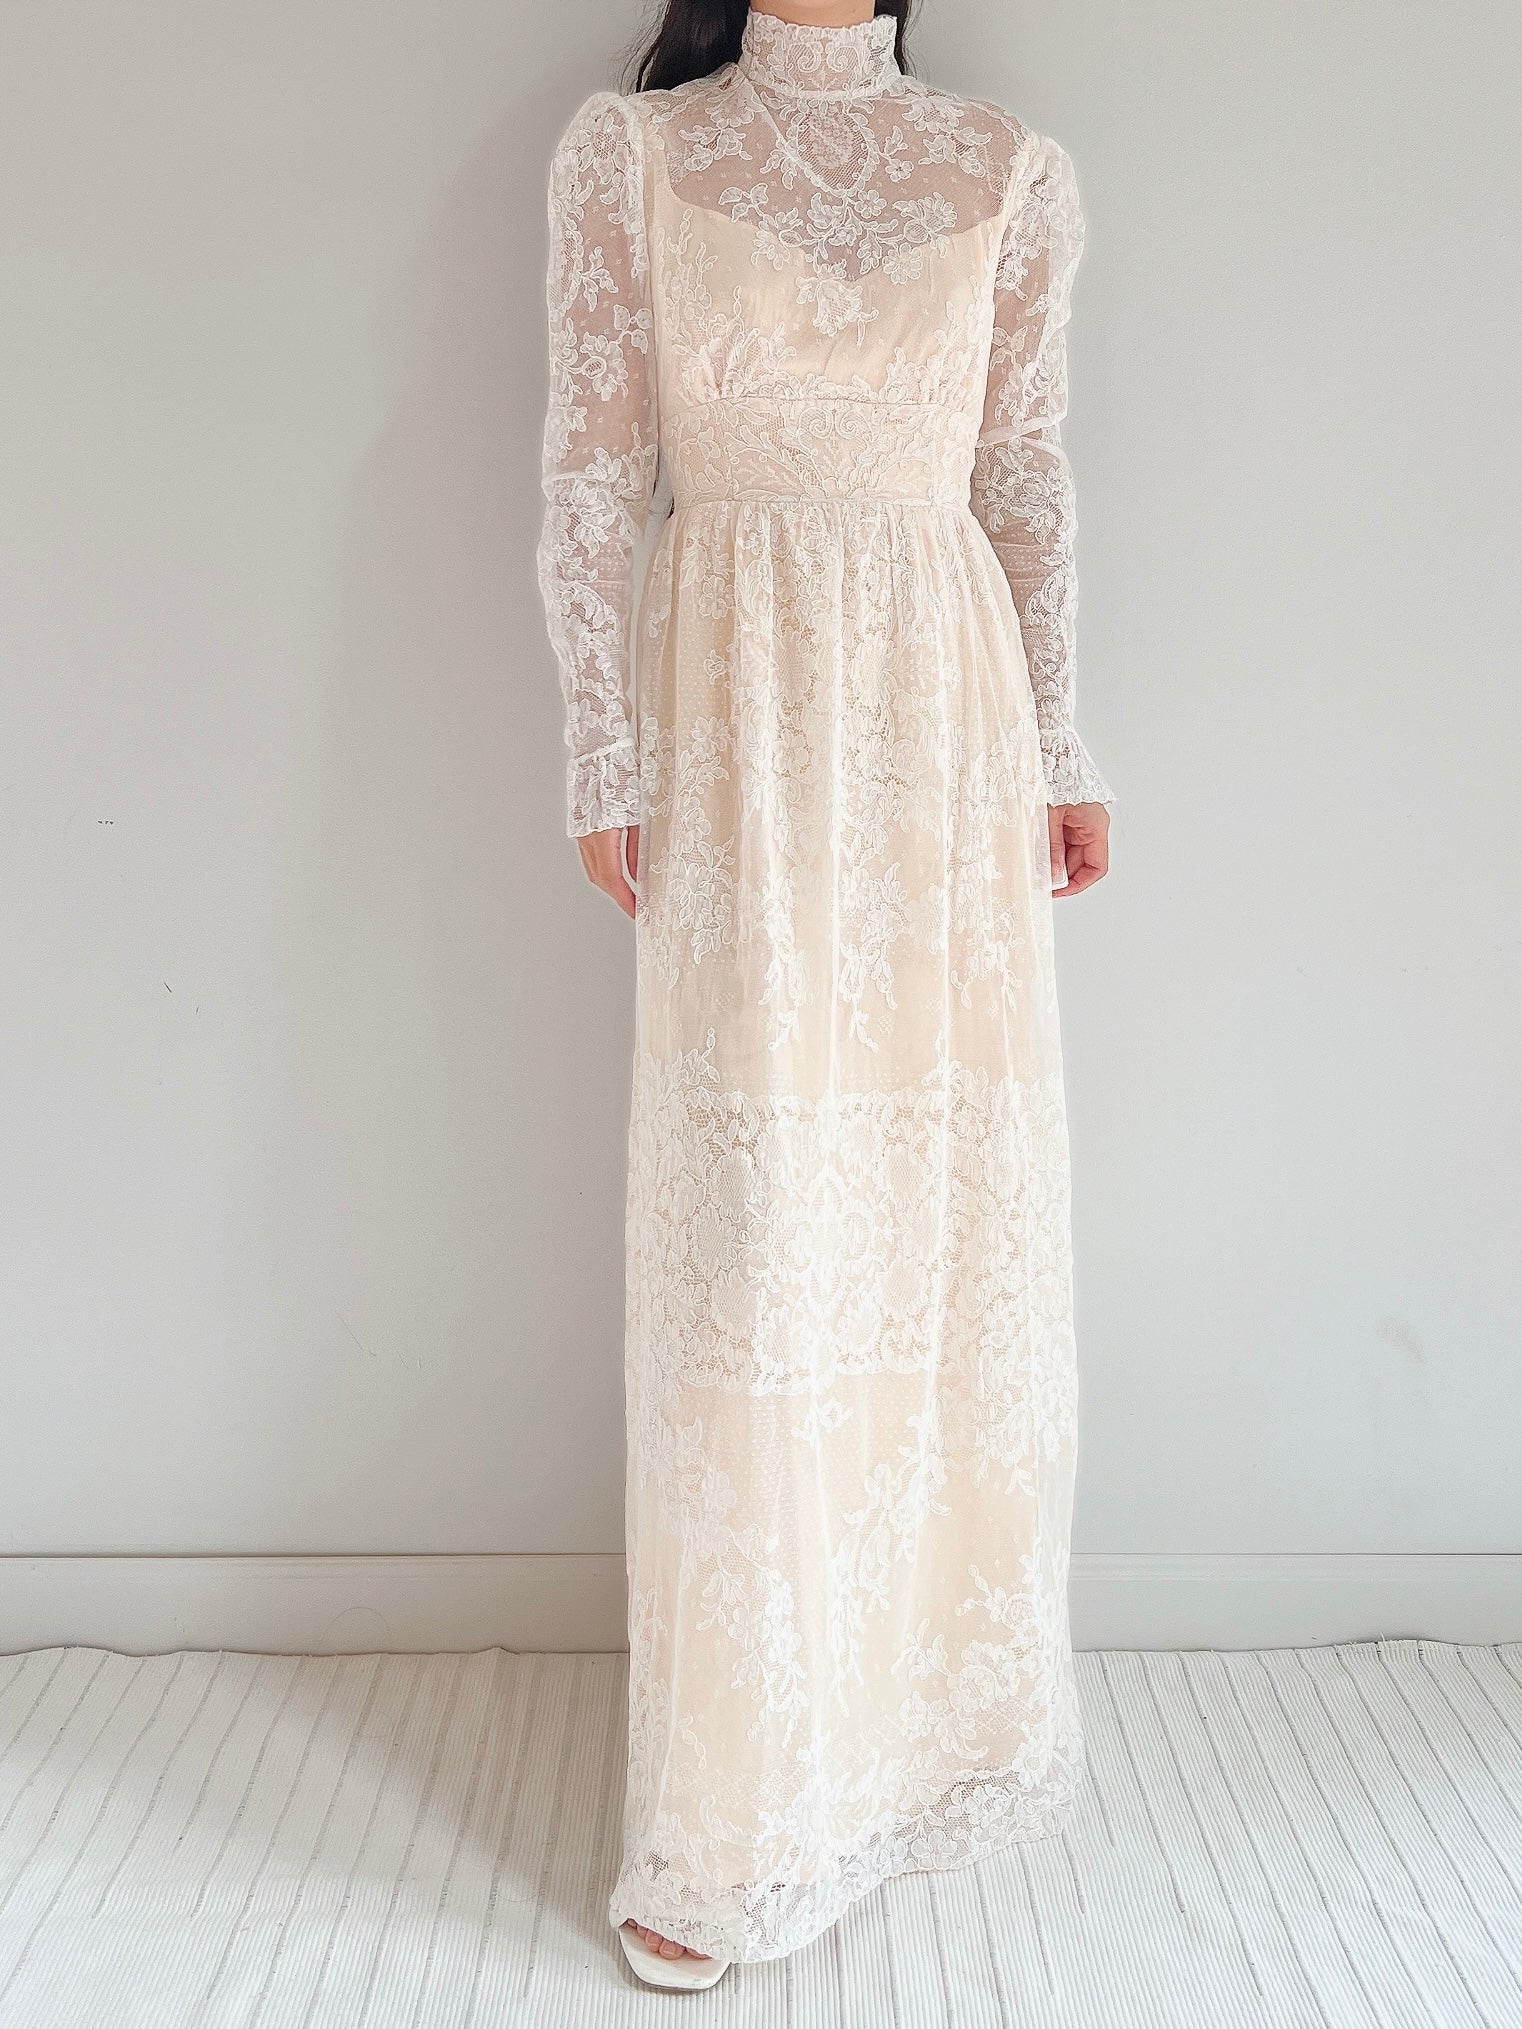 Vintage Corded Lace Beaded Gown - S